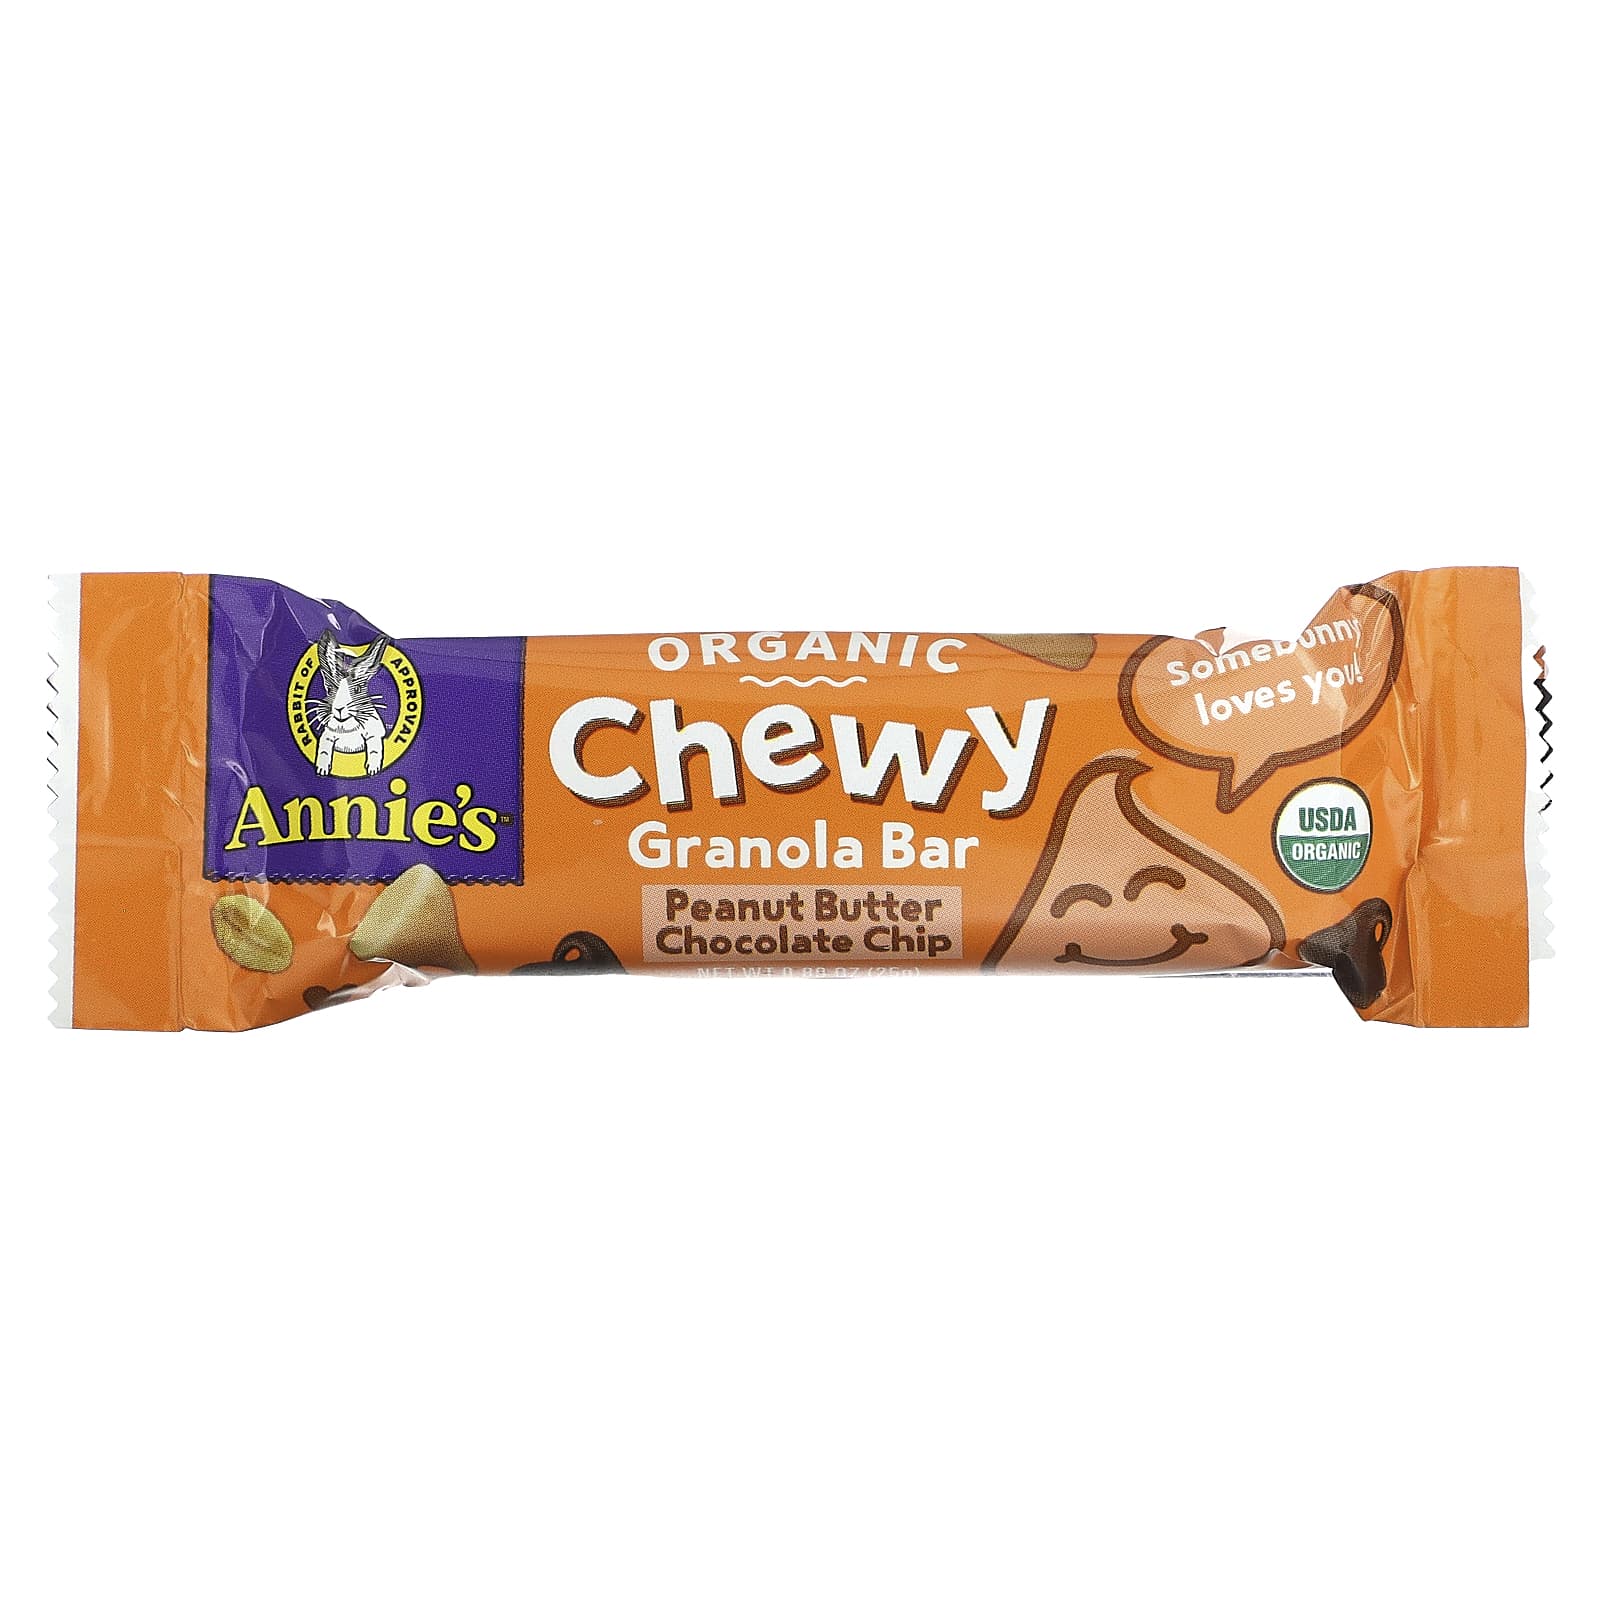 Annies Homegrown Organic Chewy Granola Bar Peanut Butter Chocolate